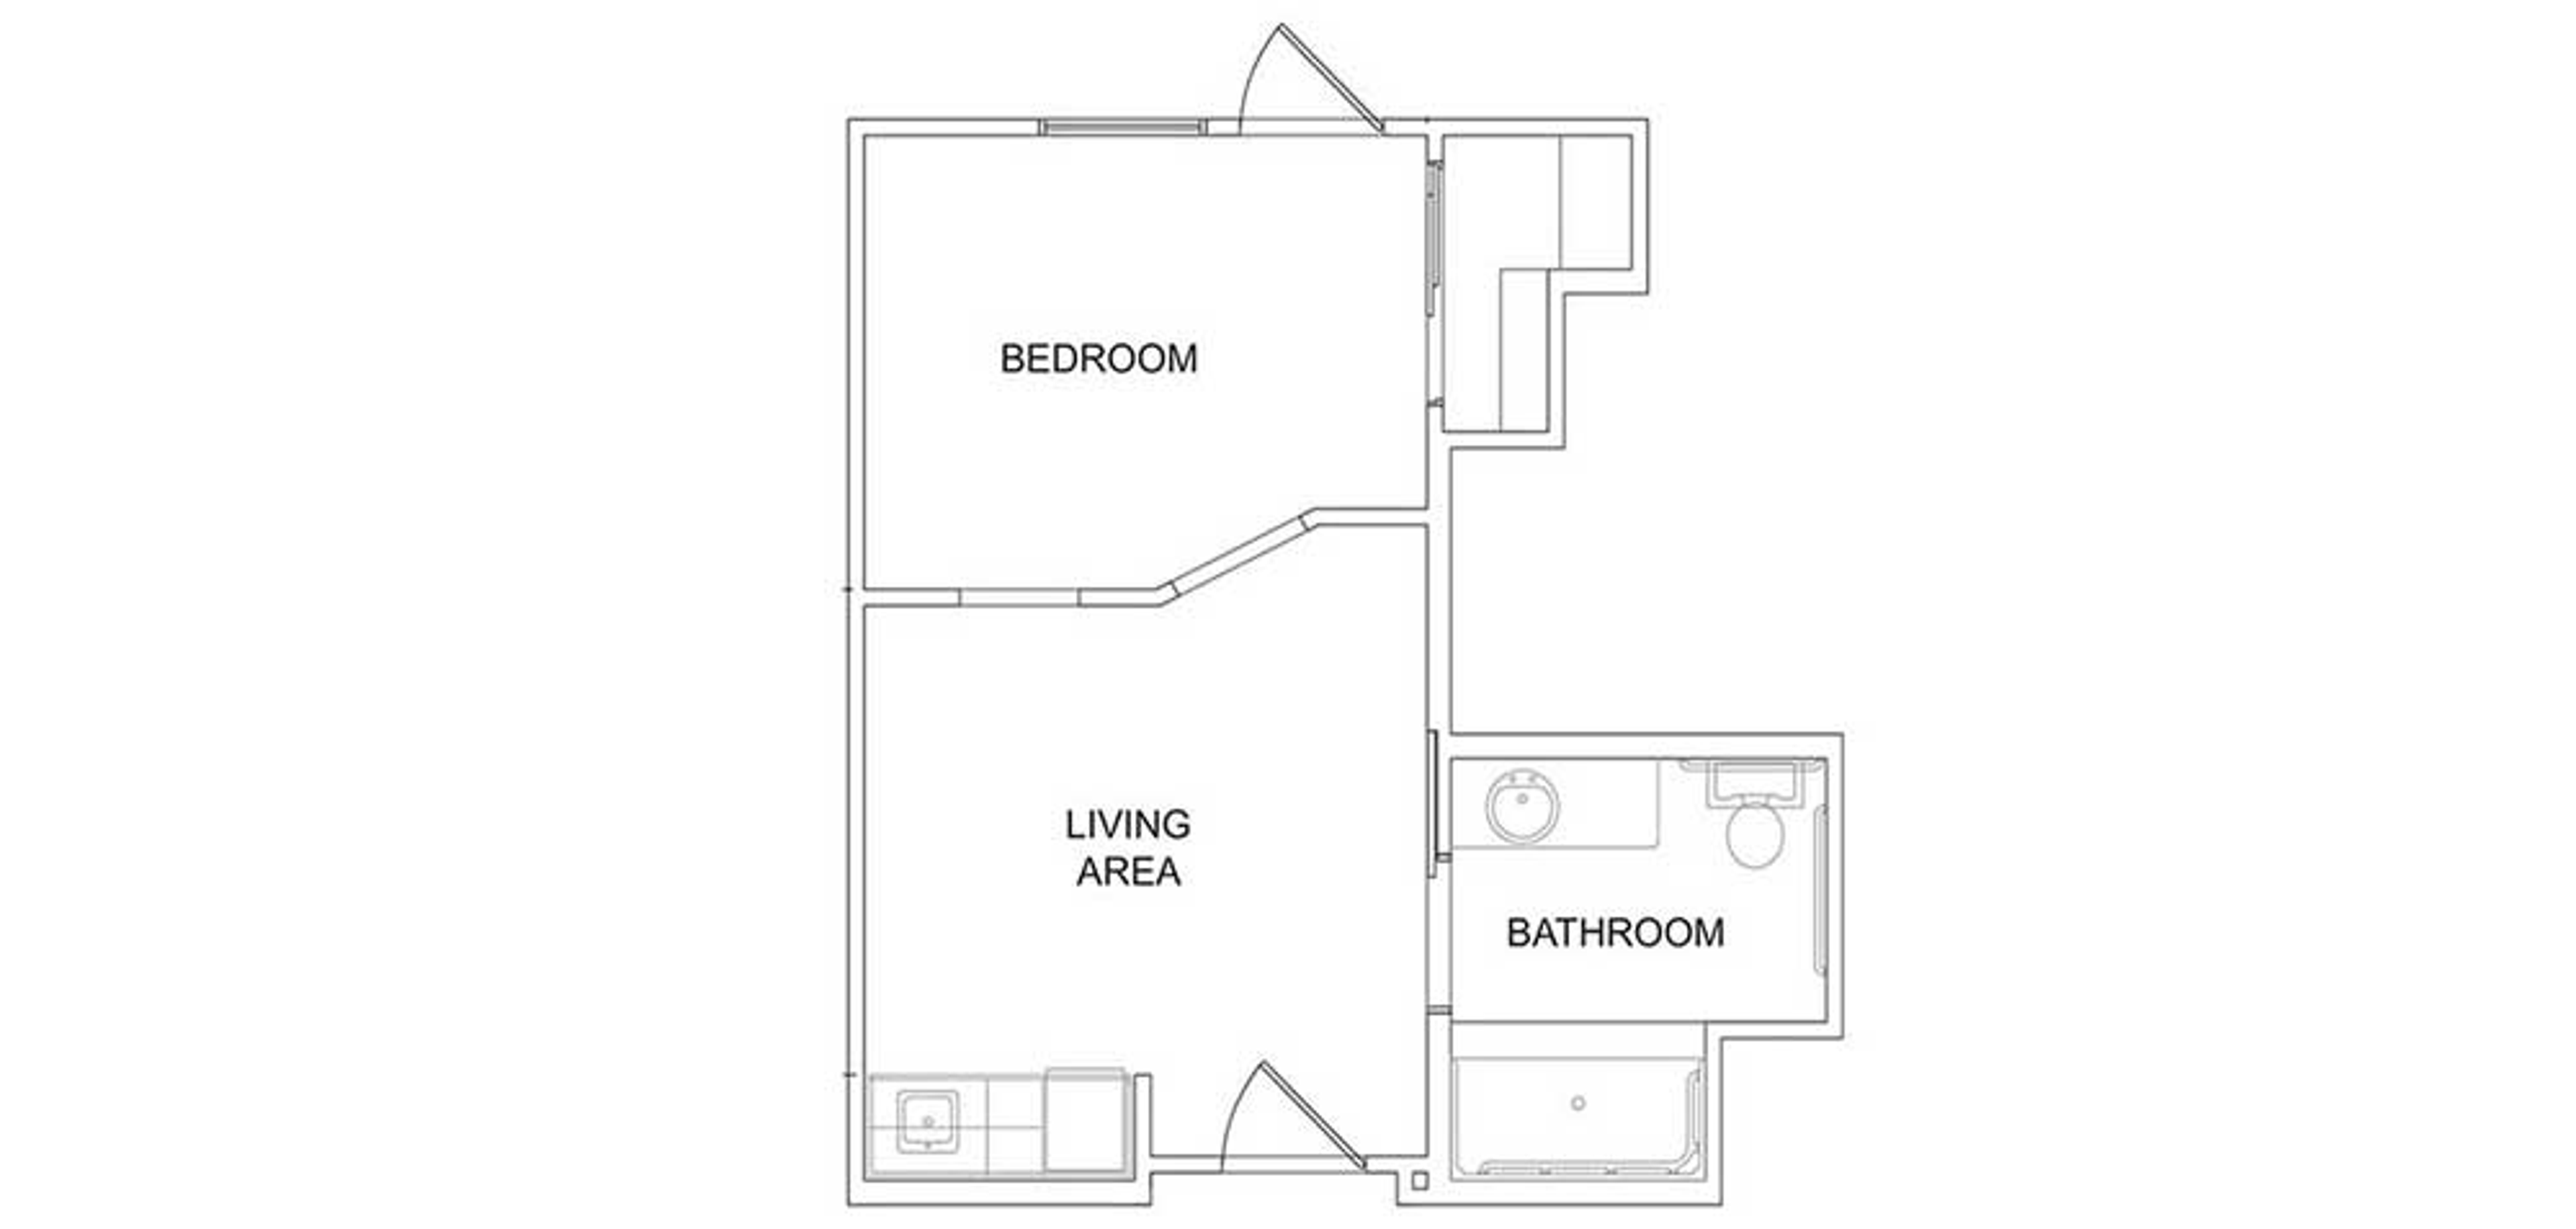 Floorplan - Pecan Pointe - 1 bed, 1 bath, Courtyard Assisted Living